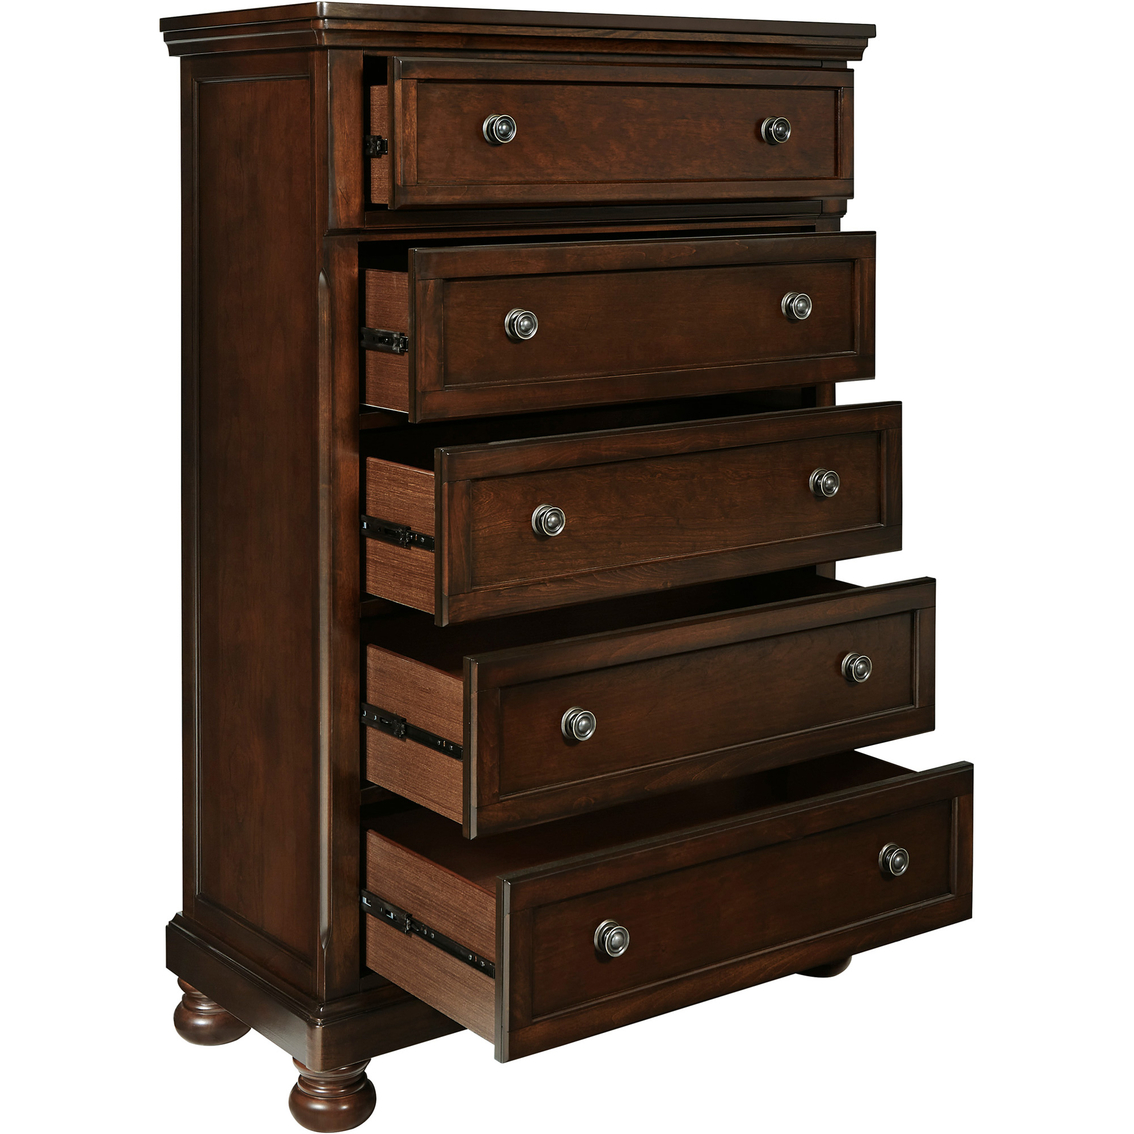 Signature Design by Ashley Porter Chest - Image 4 of 7